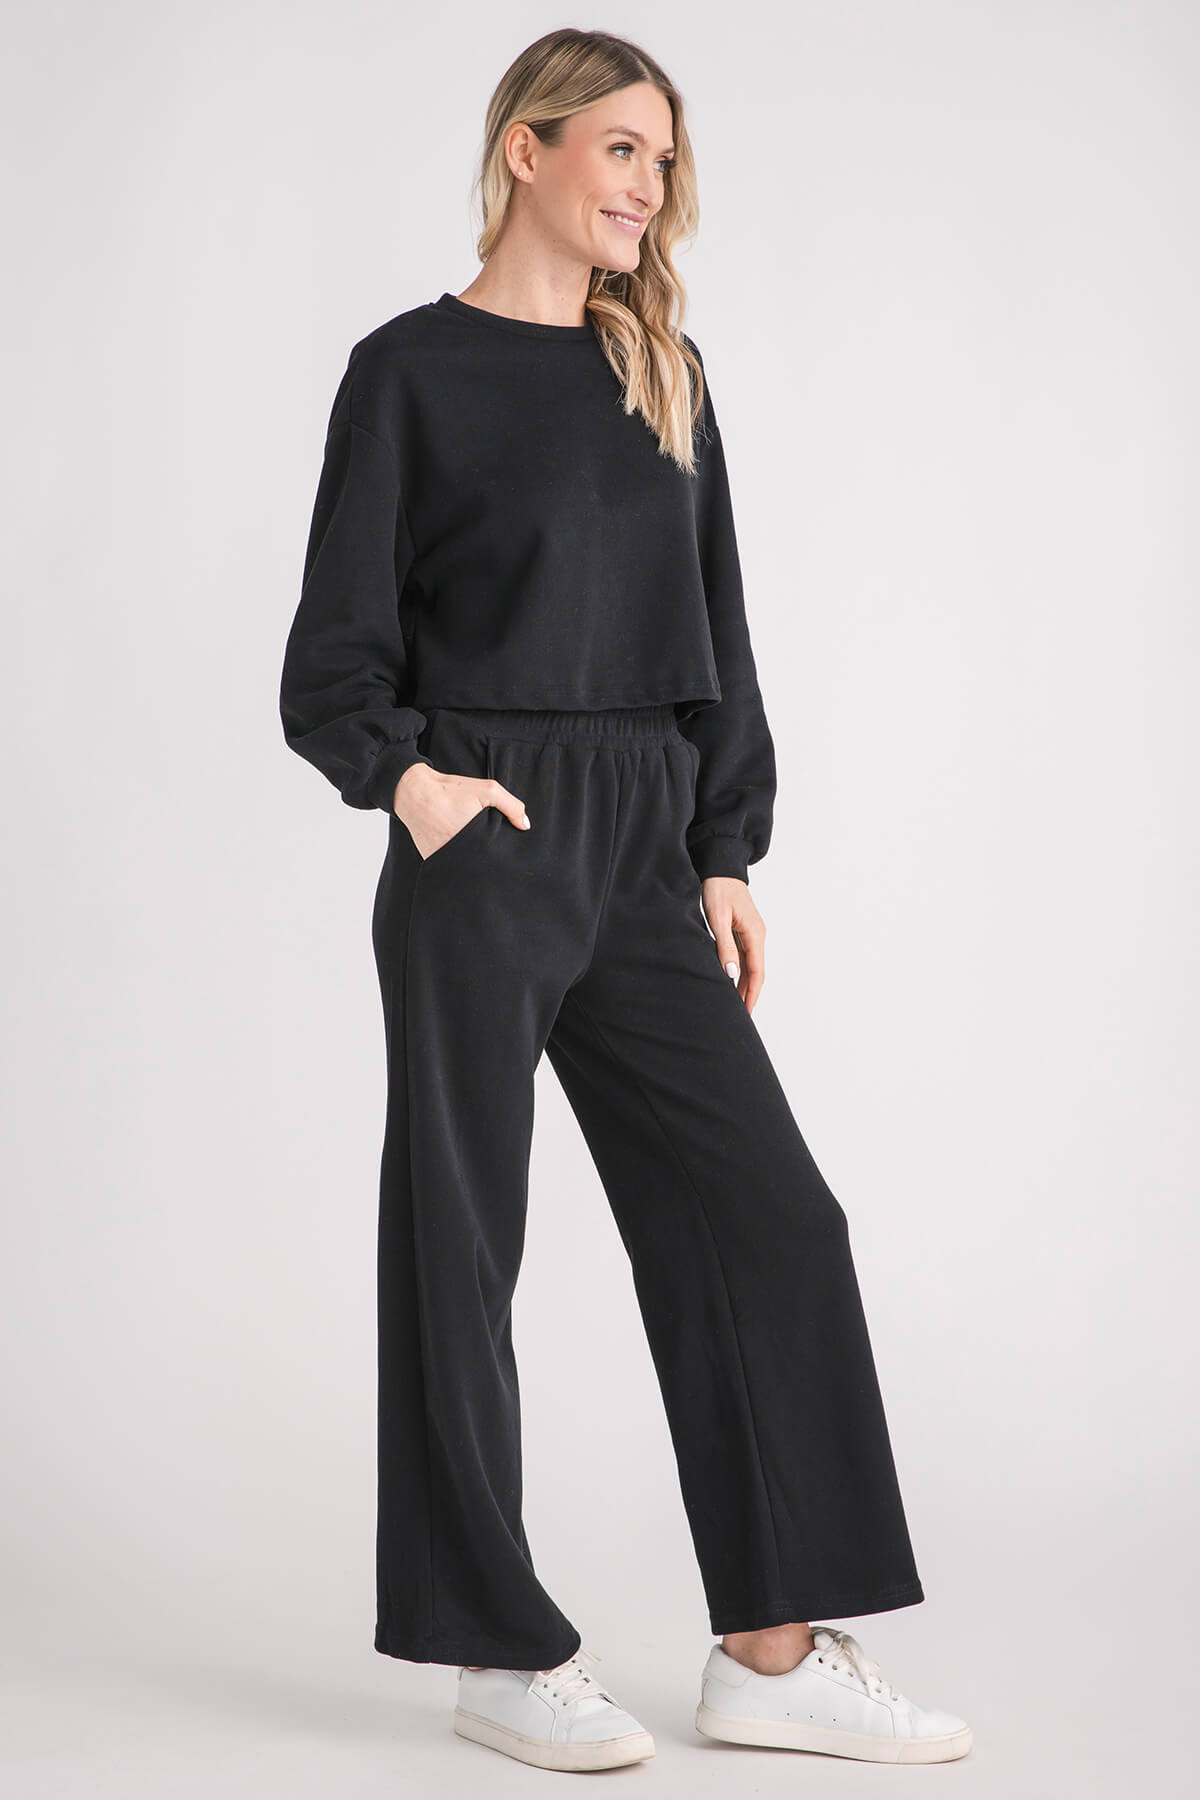 Listicle Knit Sweat Top and Pants Athleisure Lounge Set